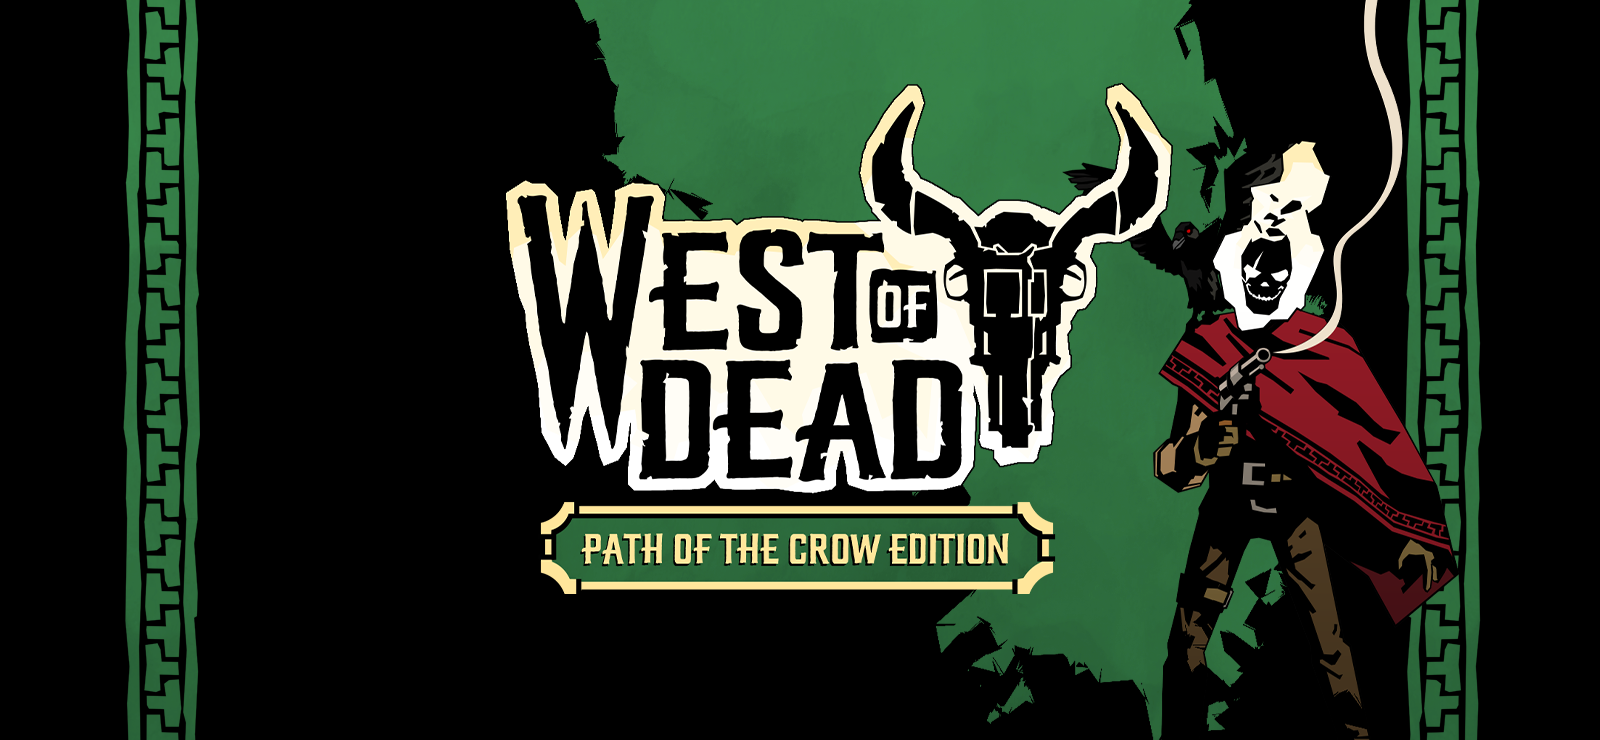 West Of Dead - Path Of The Crow Edition